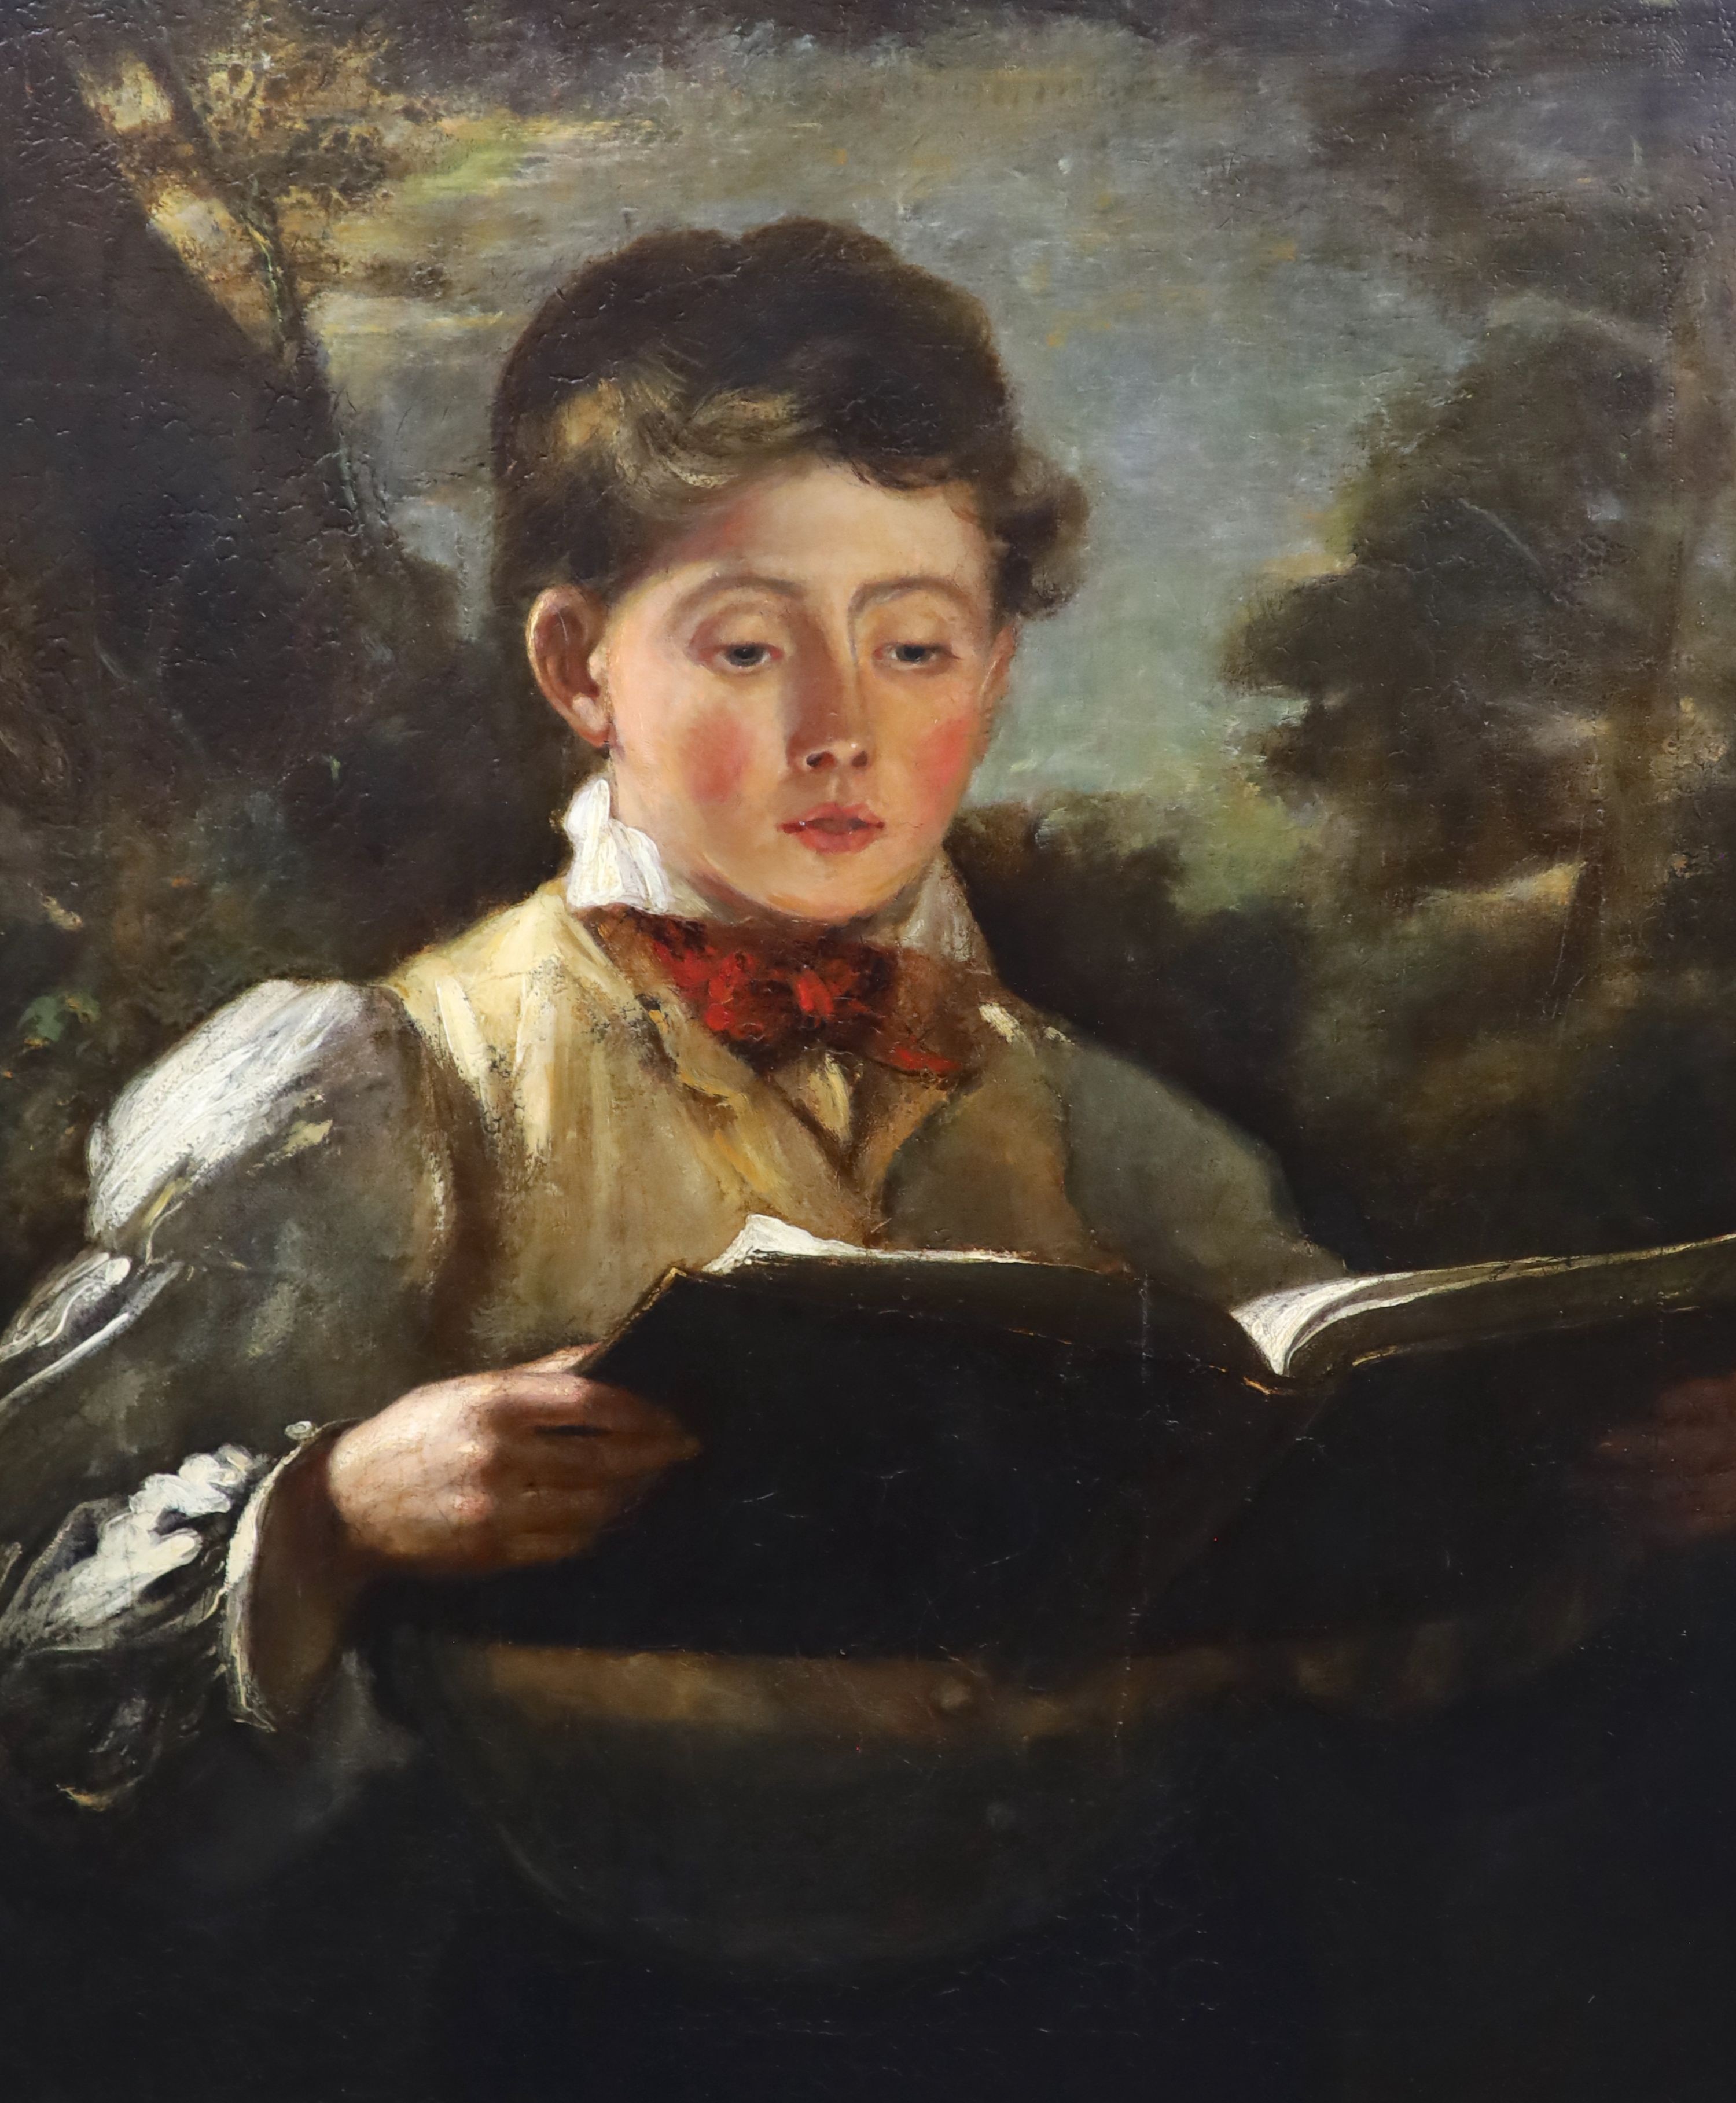 William Smellie Watson (1796-1874), The Student, Oil on canvas, 76 x 63cm.